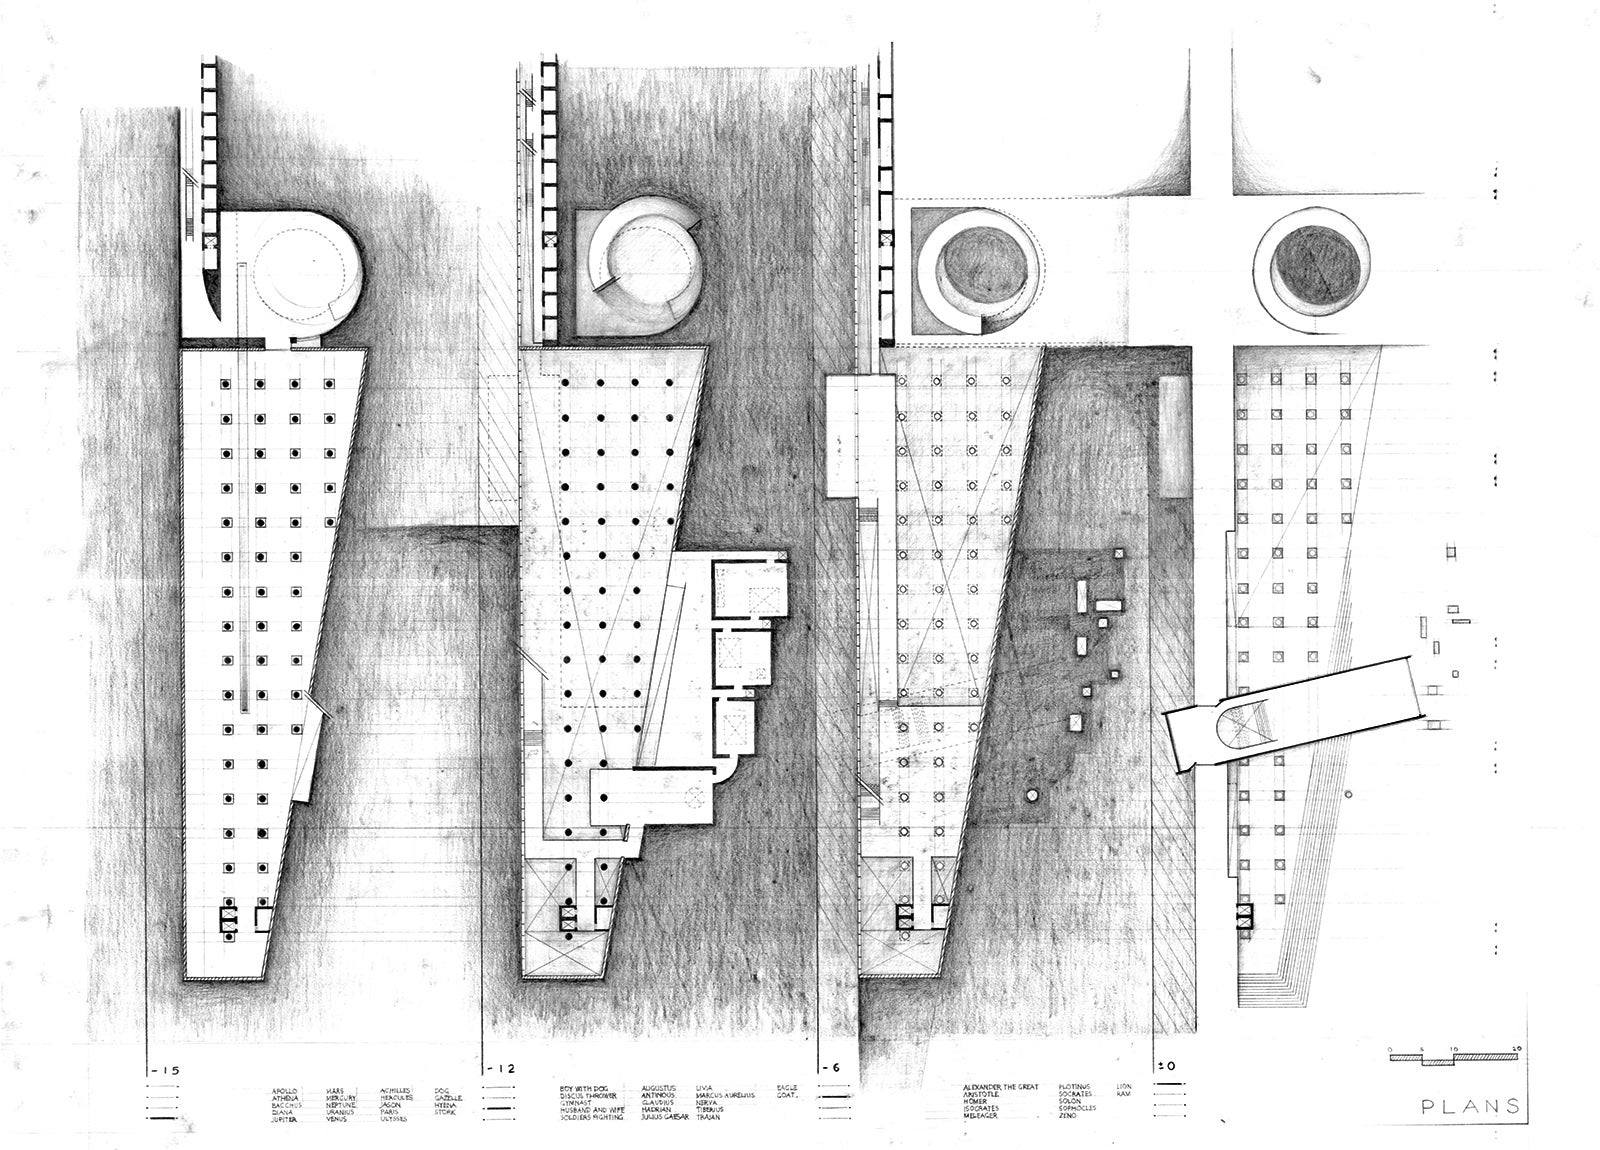 A pencil drafted and shaded plan of the structure.